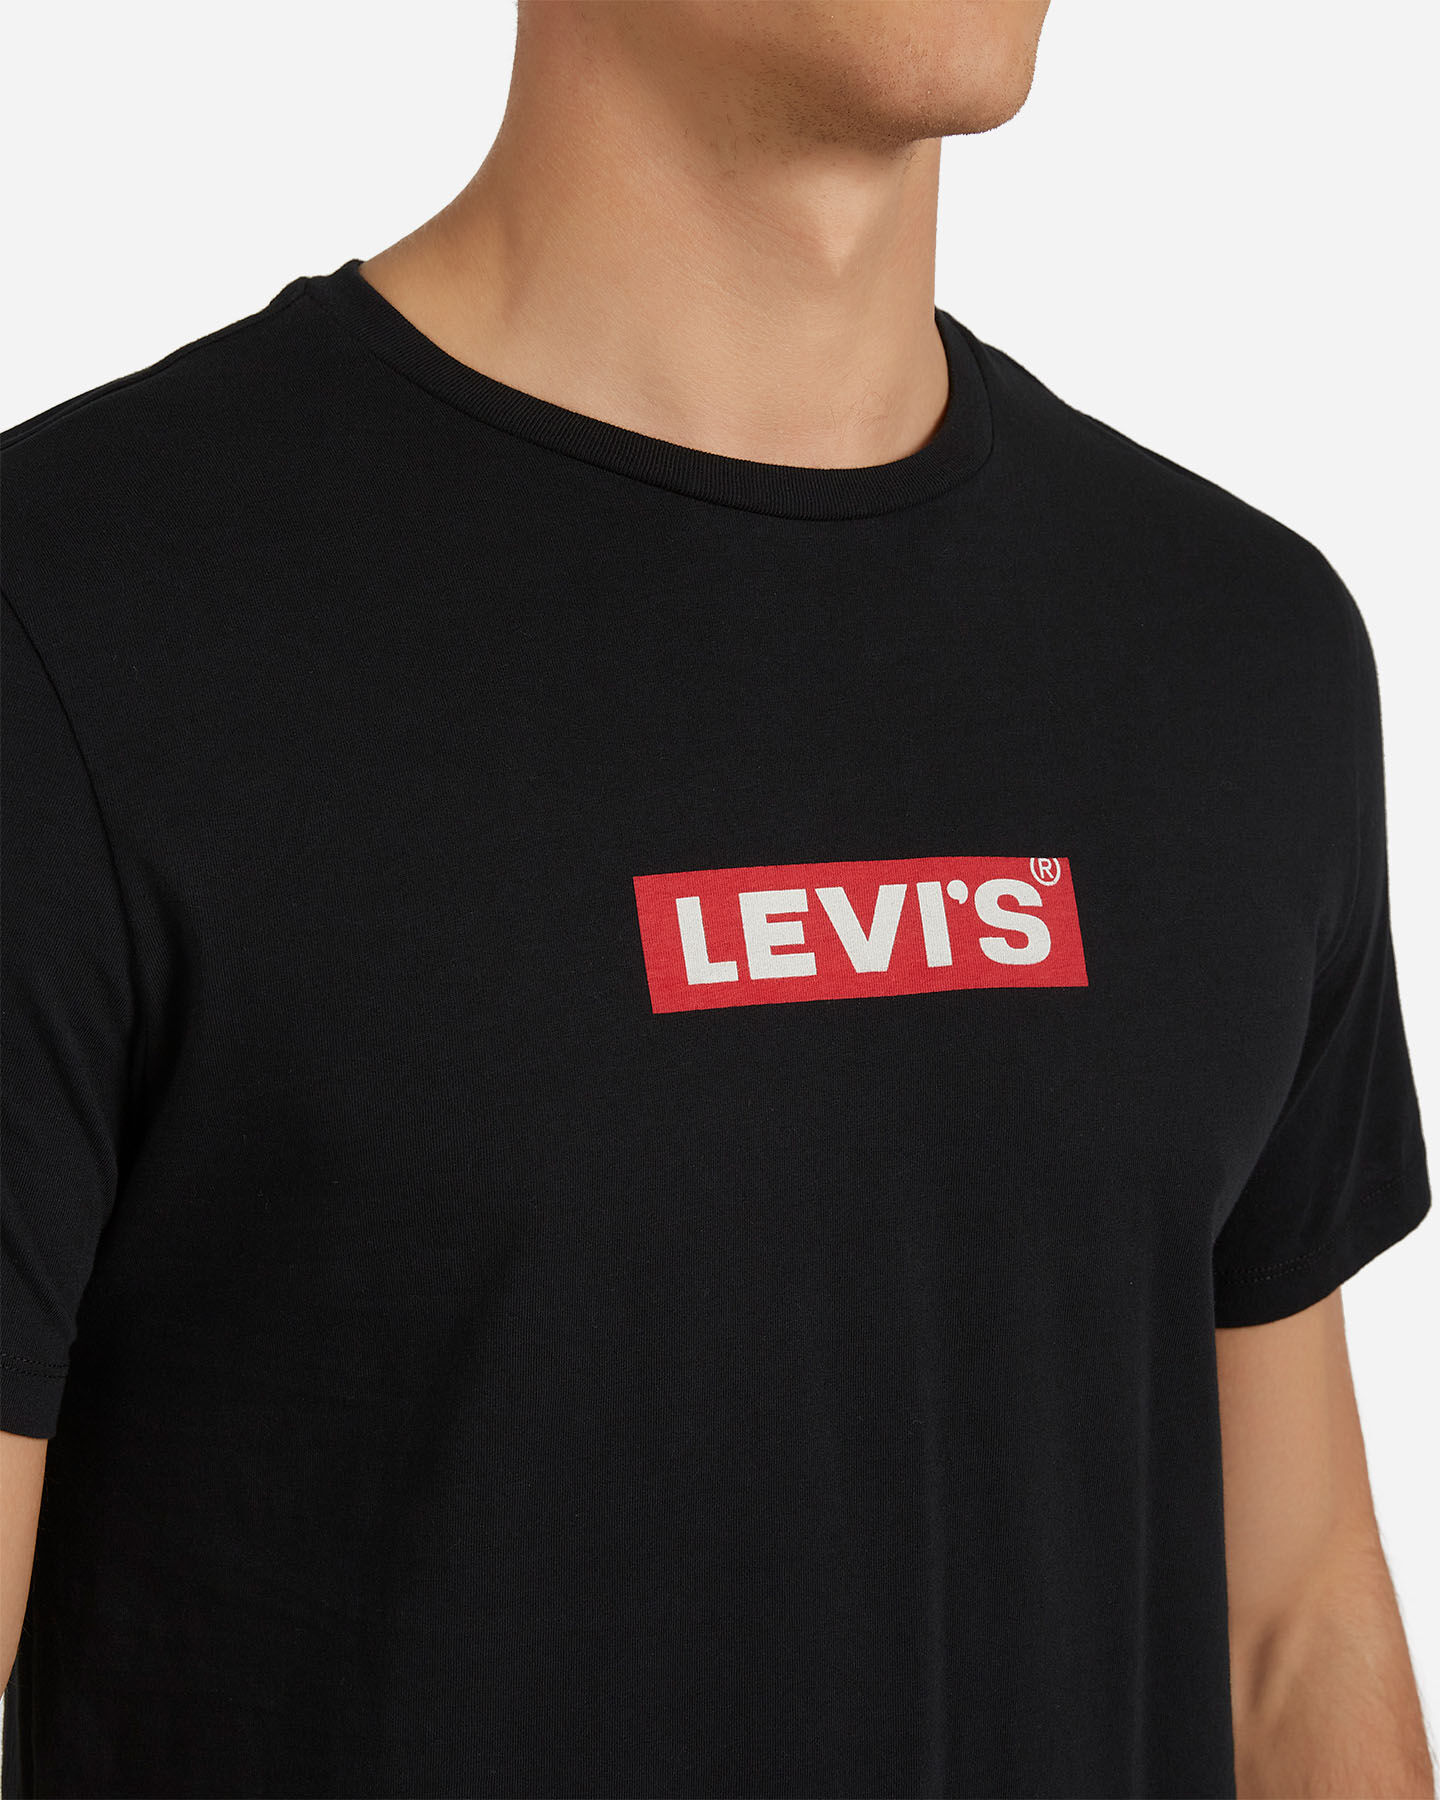  T-Shirt LEVI'S BOXTAB GRAPHIC M S4076920|002|XS scatto 4